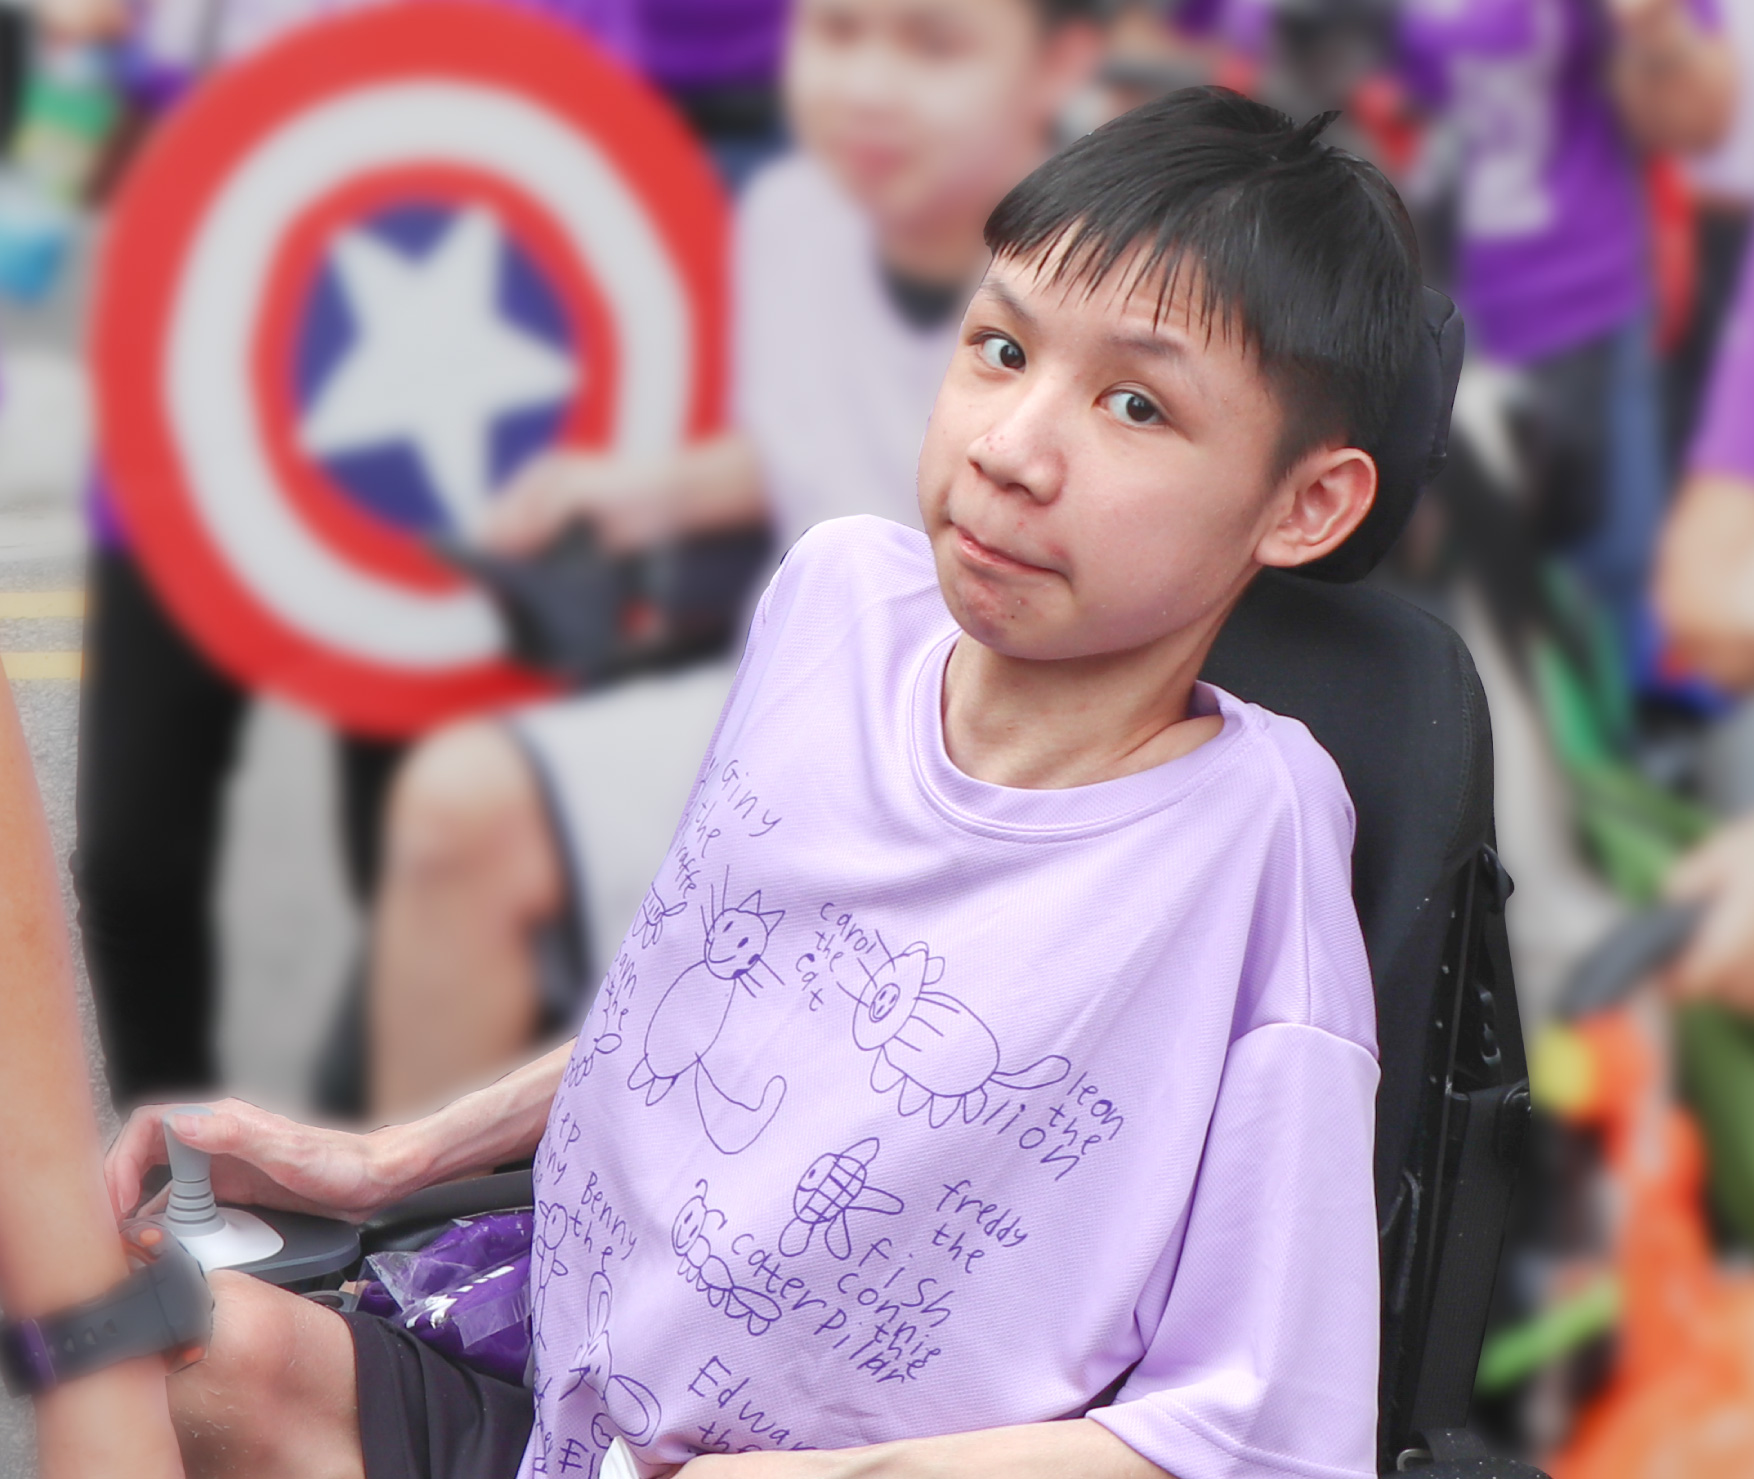 Ernest Wong from Muscular Dystrophy Association Singapore.